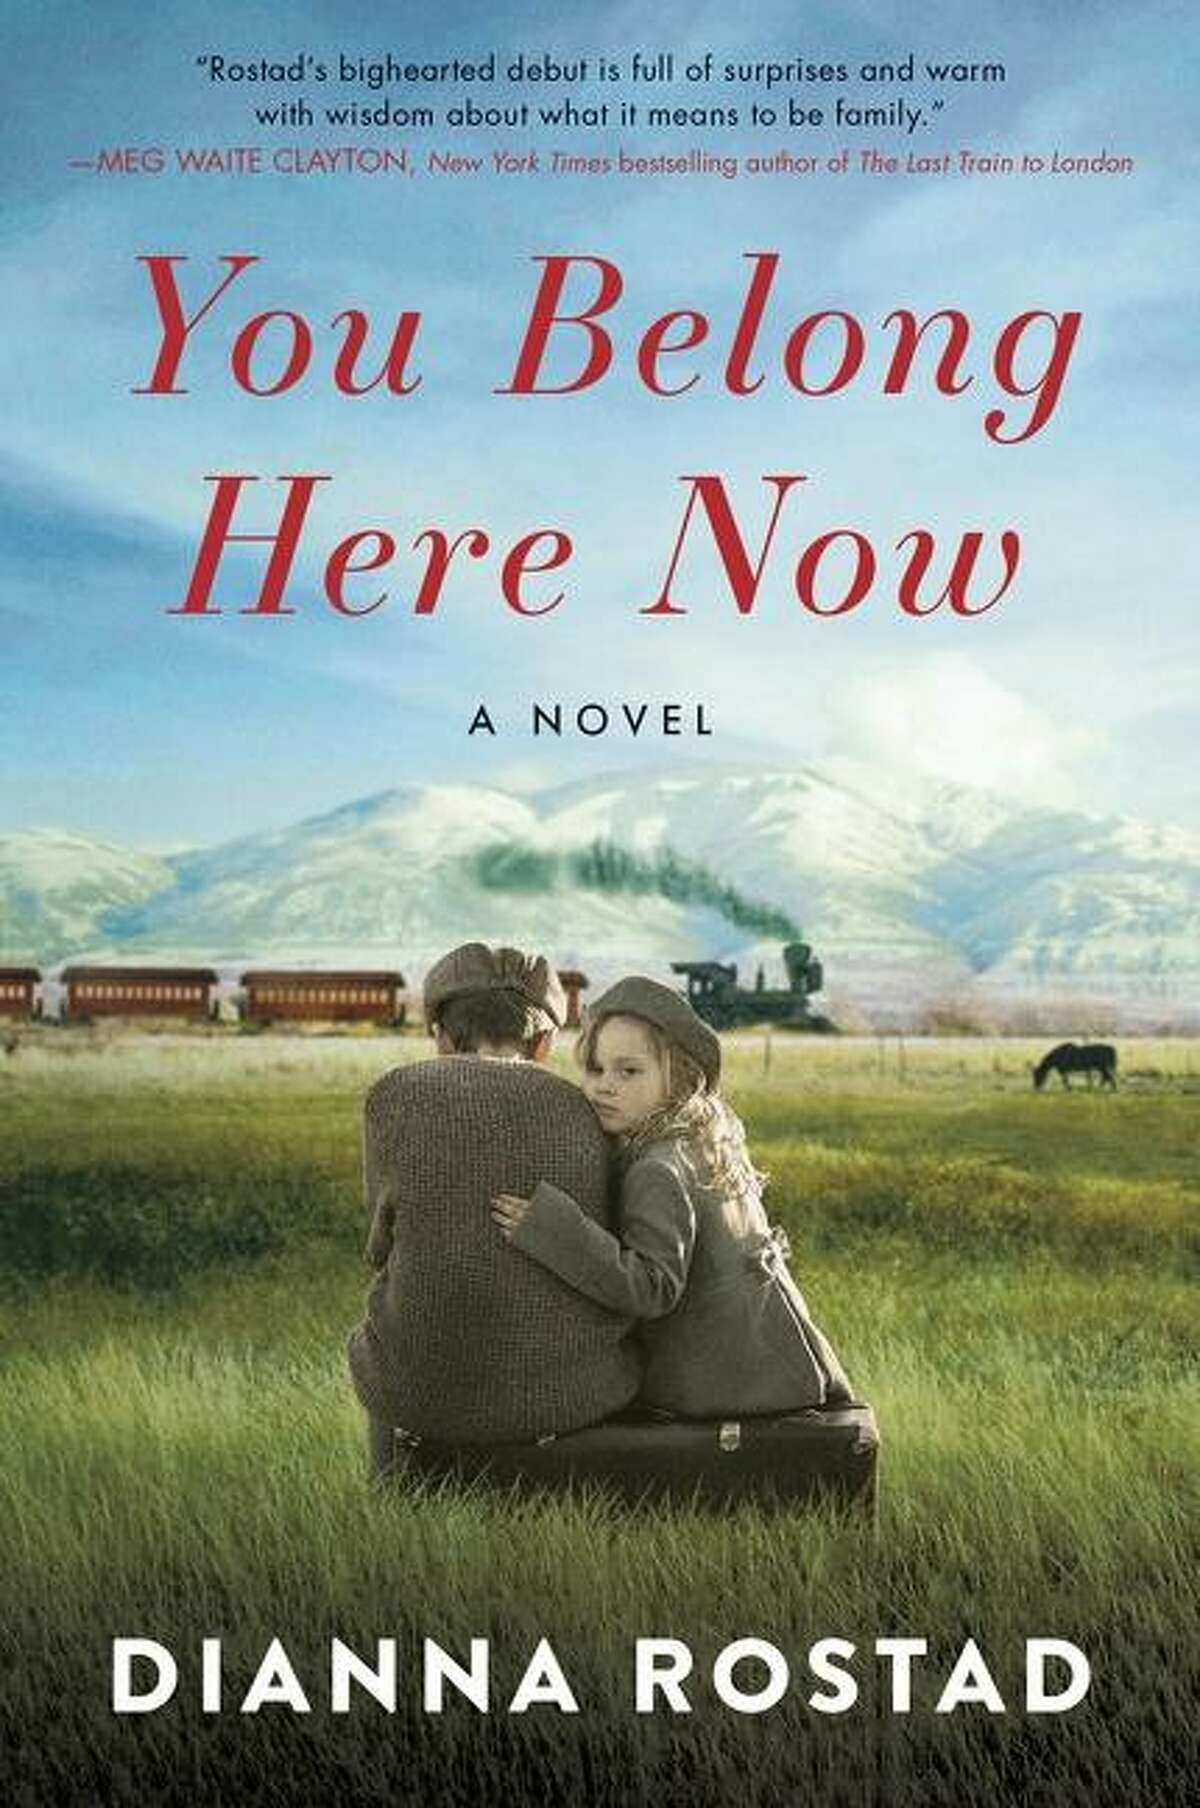 "You Belong Here Now" by Dianna Rostad.